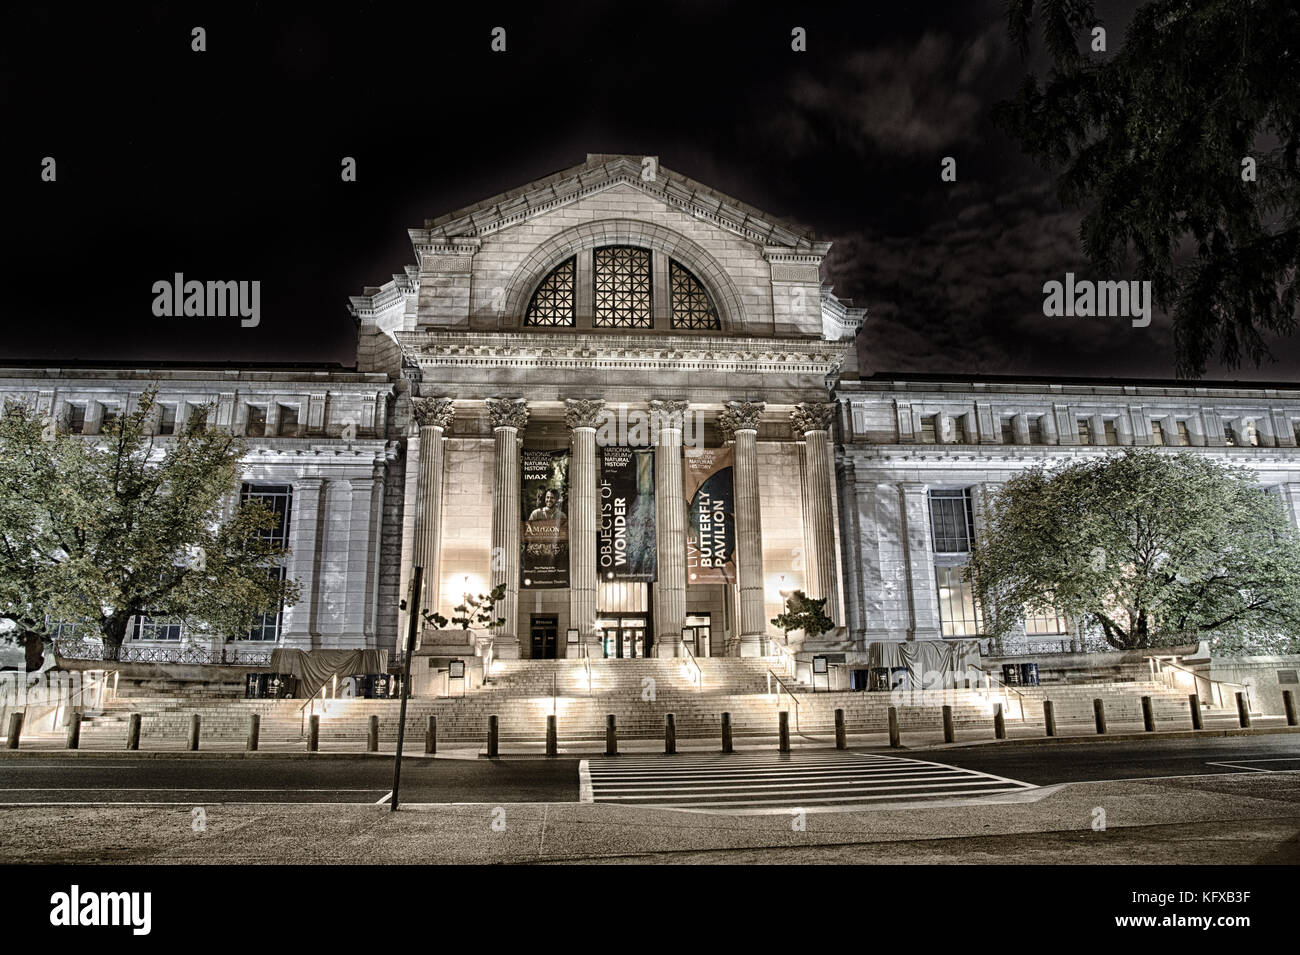 September 12, 2017, Washington, DC, USA: The Smiothsonian National Museum of Natural History in Washington DC is lit up at night. Stock Photo